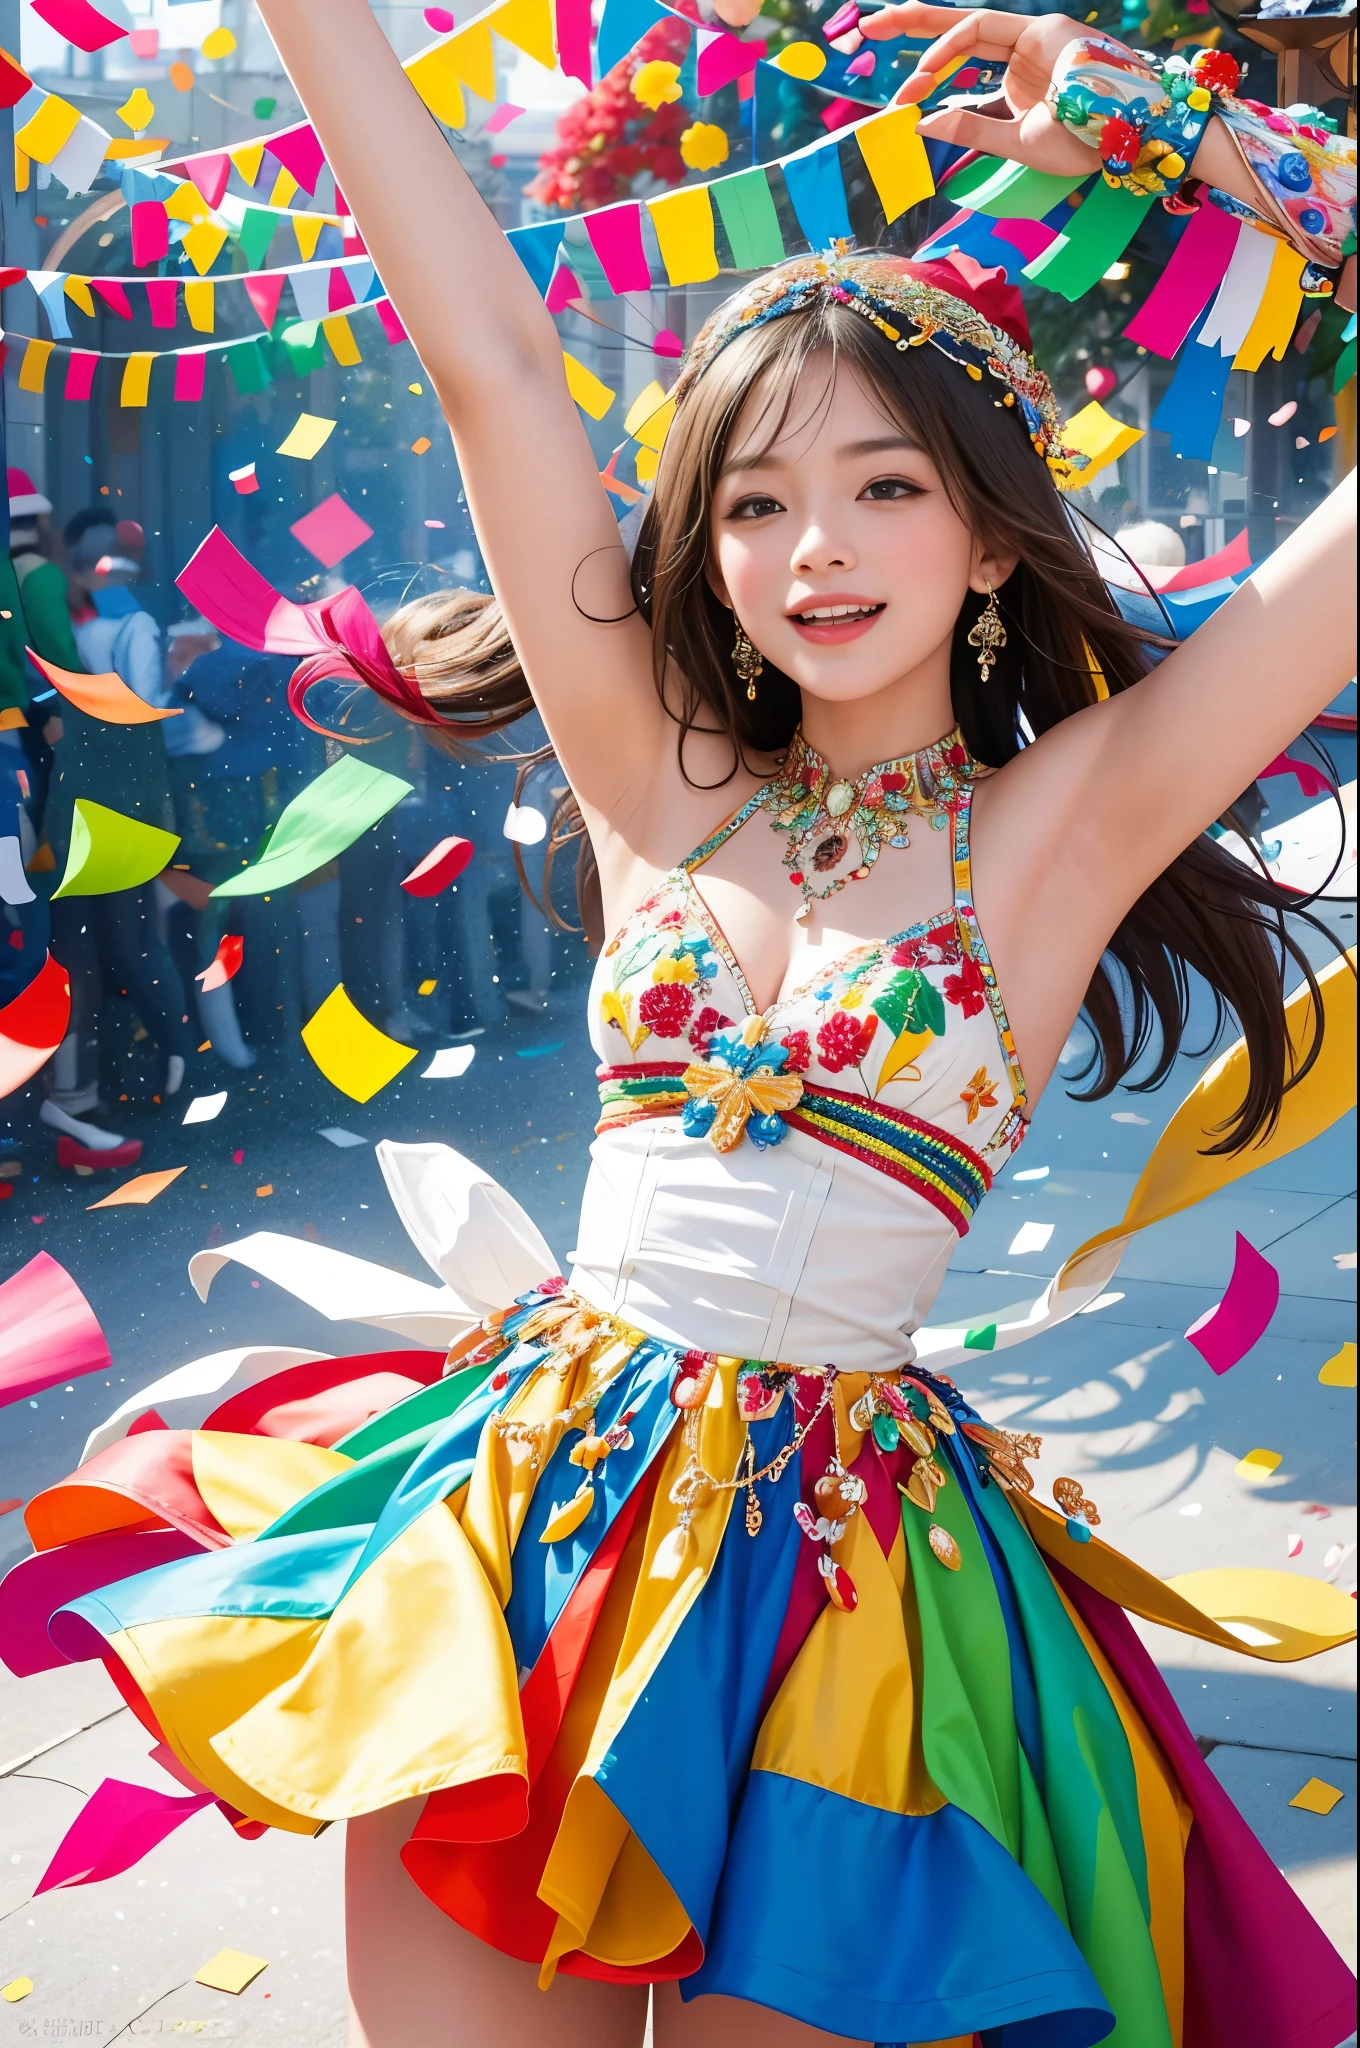 Colorful Confetti: A Scene of Joy and Celebration in Ultra-Detailed, High Definition

Amidst the lively and ecstatic atmosphere, vibrant confetti flutters in the crisp air, dancing gracefully in the soft, warm sunlight. The confetti, a myriad of colors, includes hues of red, orange, yellow, green, blue, indigo, and violet, creating a kaleidoscopic spectacle that illuminates the festive scene. Each confetti piece exhibits intricate patterns and textures, allowing for a mesmerizing detail that shines when captured in the highest quality, ultrahigh definition. This masterpiece of a